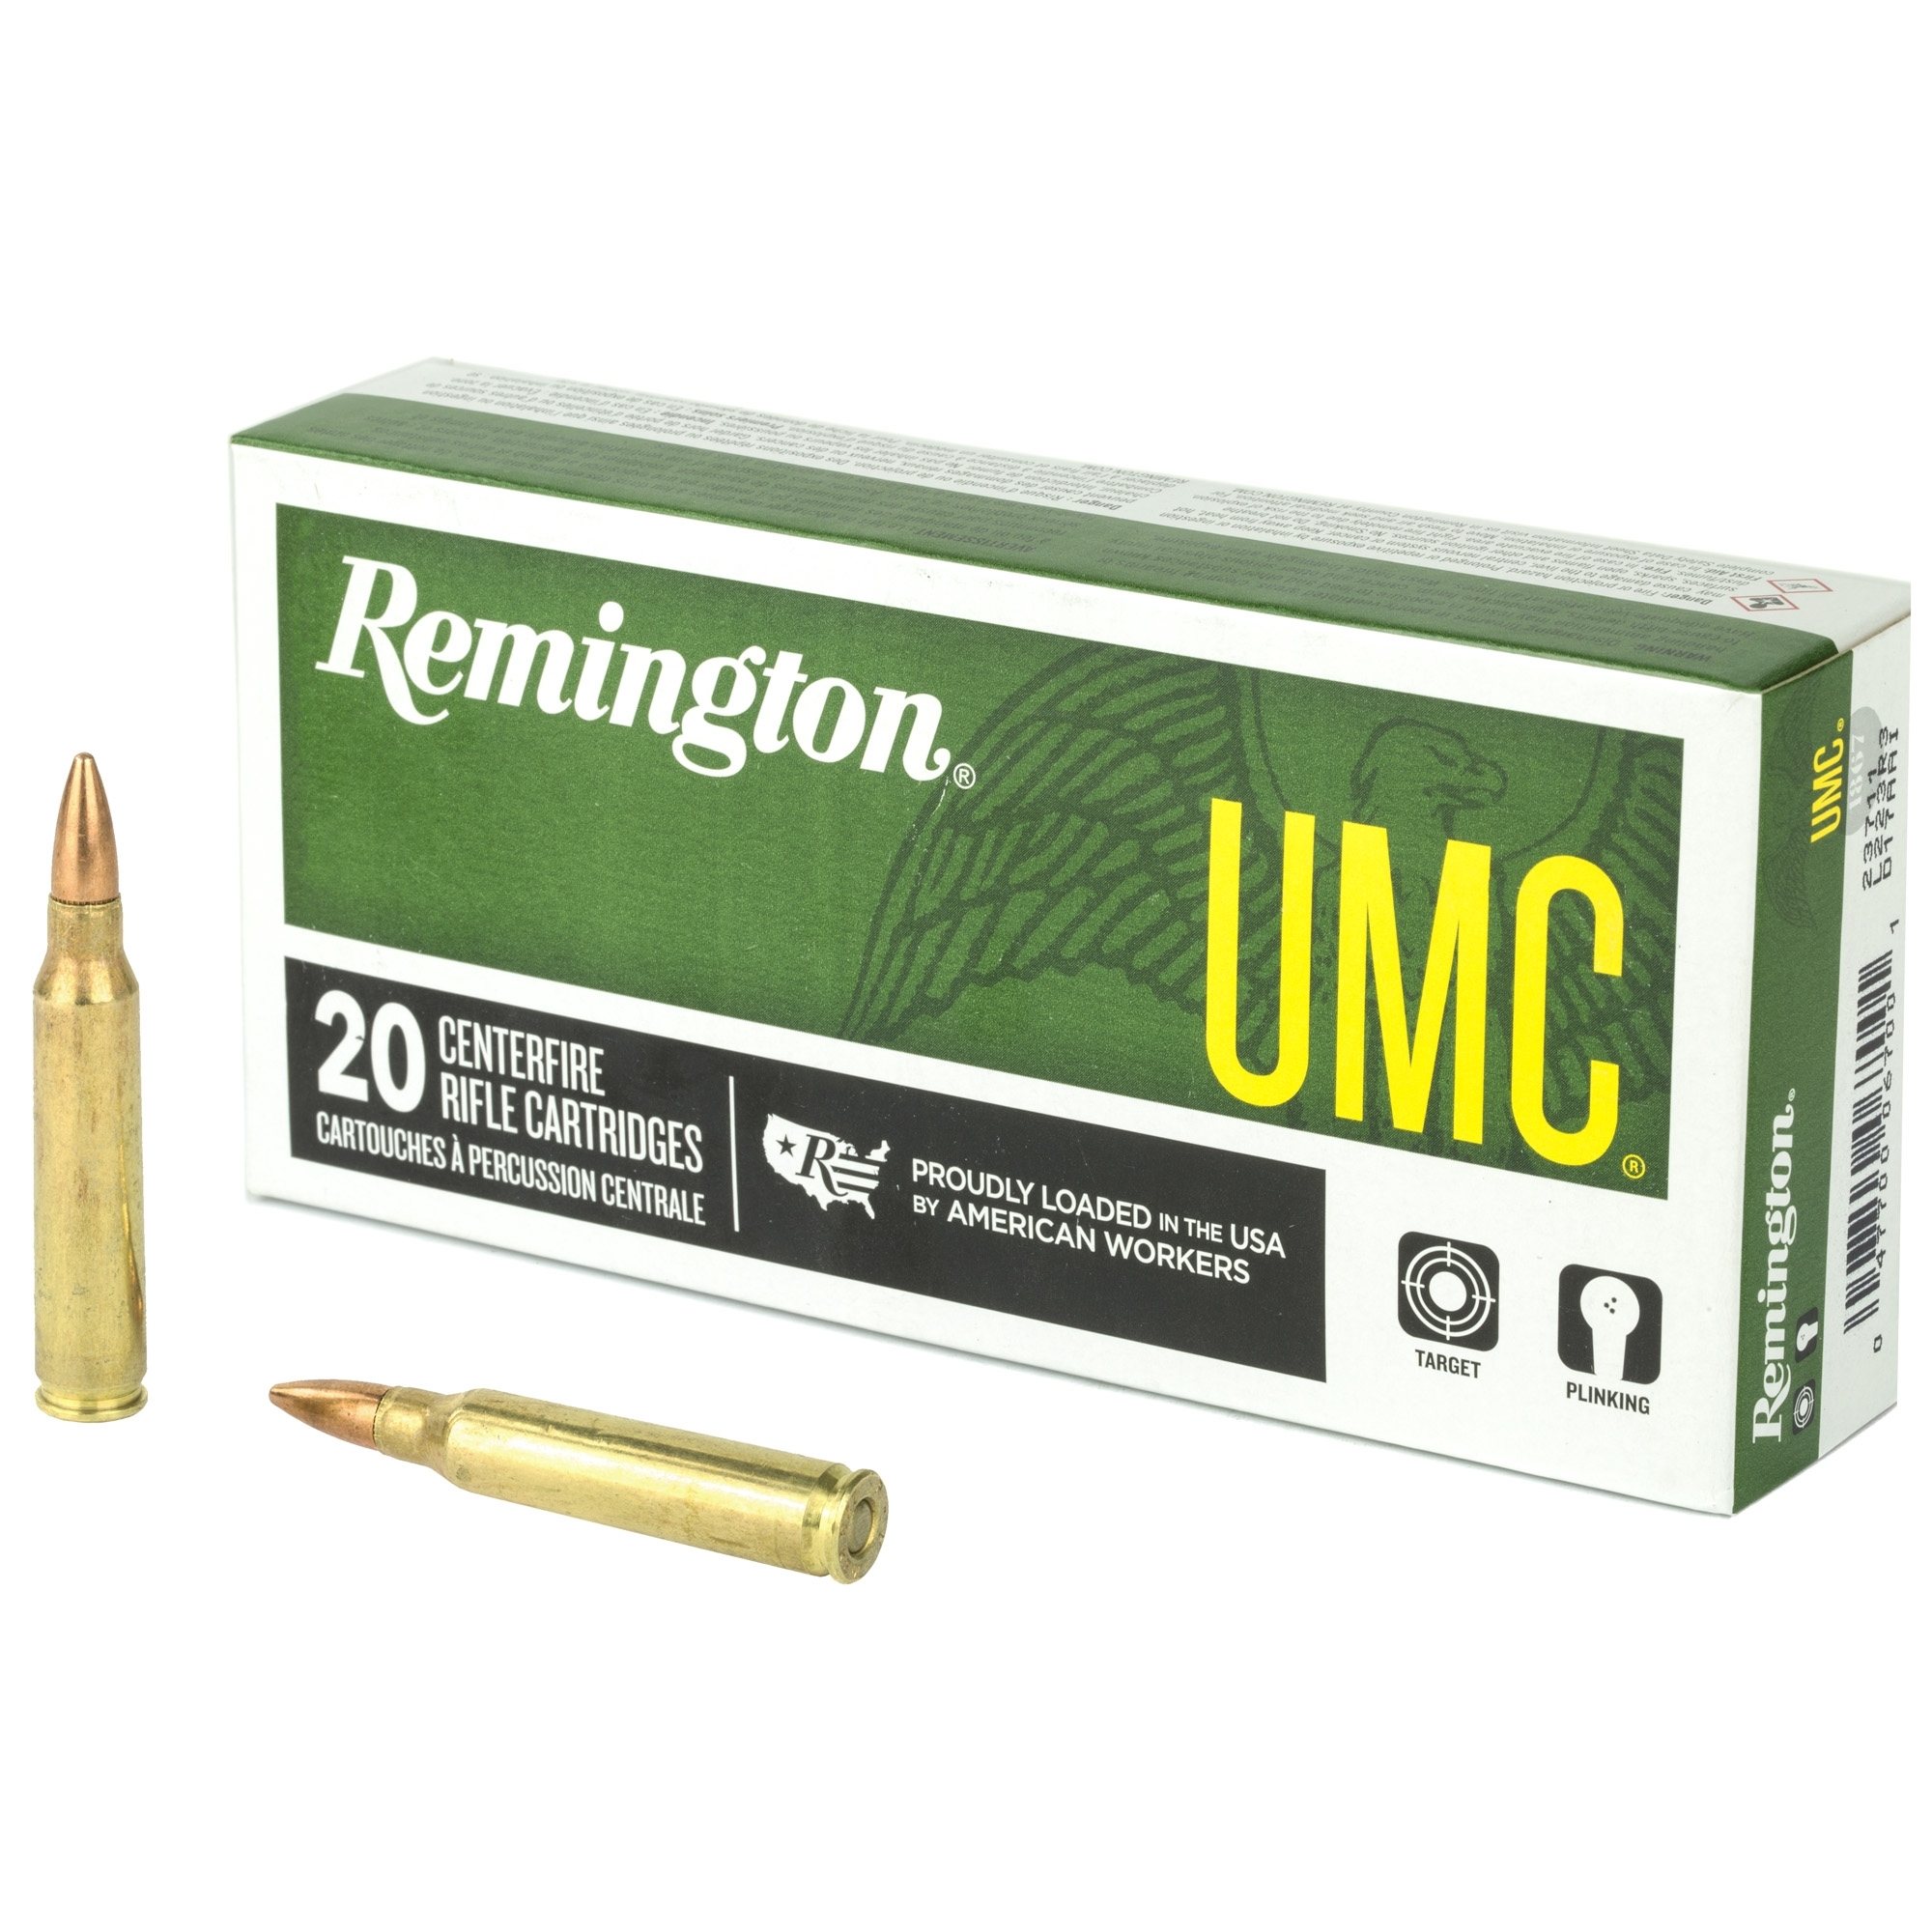 PMC 55gr .223 Rem Ammo Box of 20 - 223A